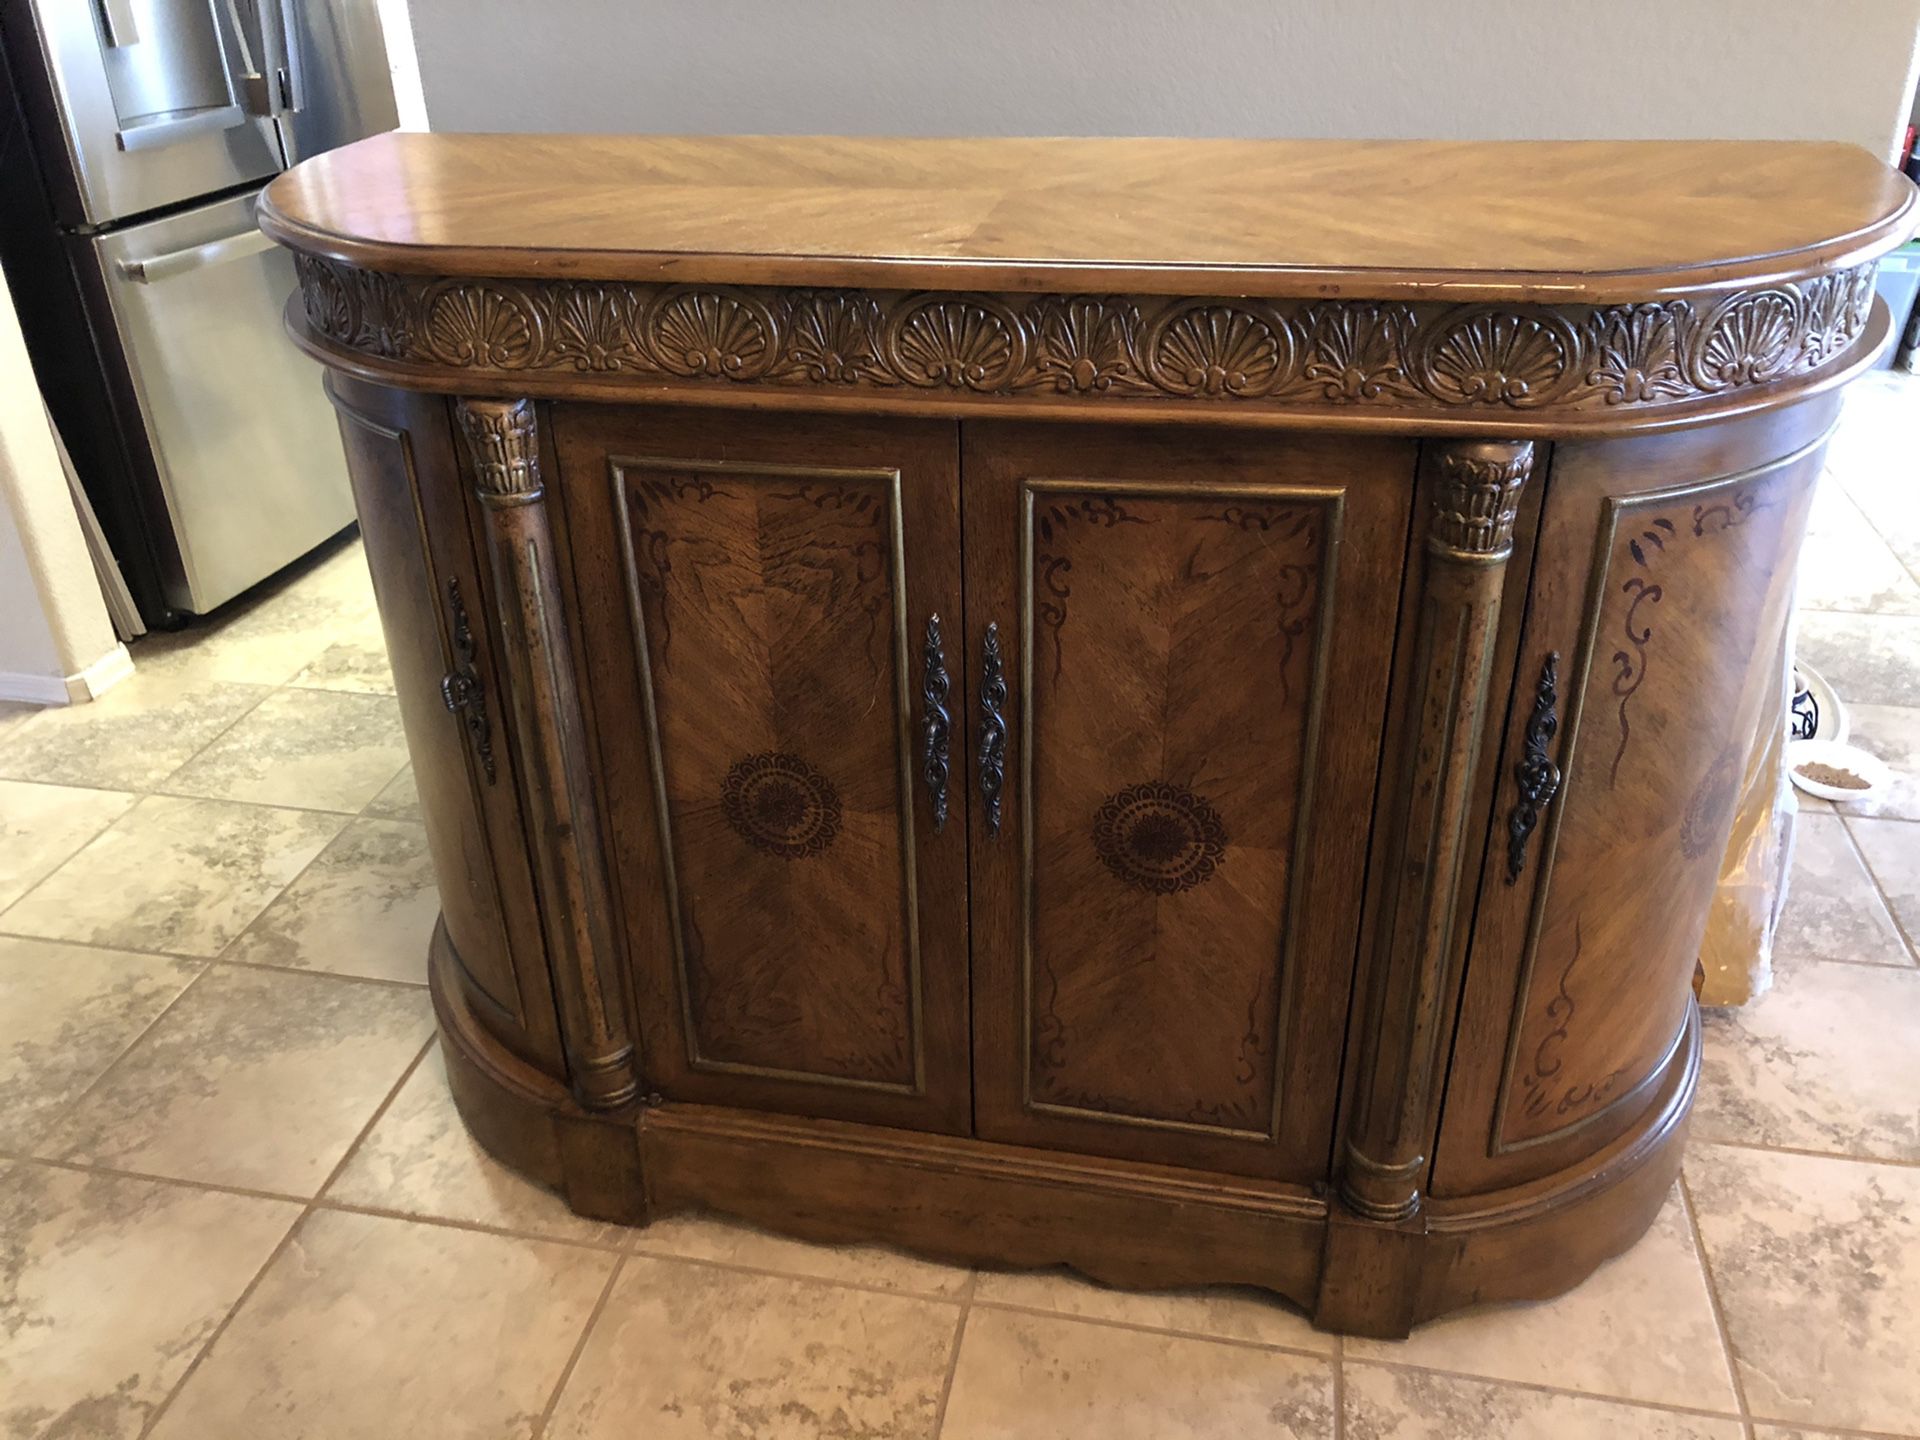 Curved buffet/cabinet for dining room room or living room.